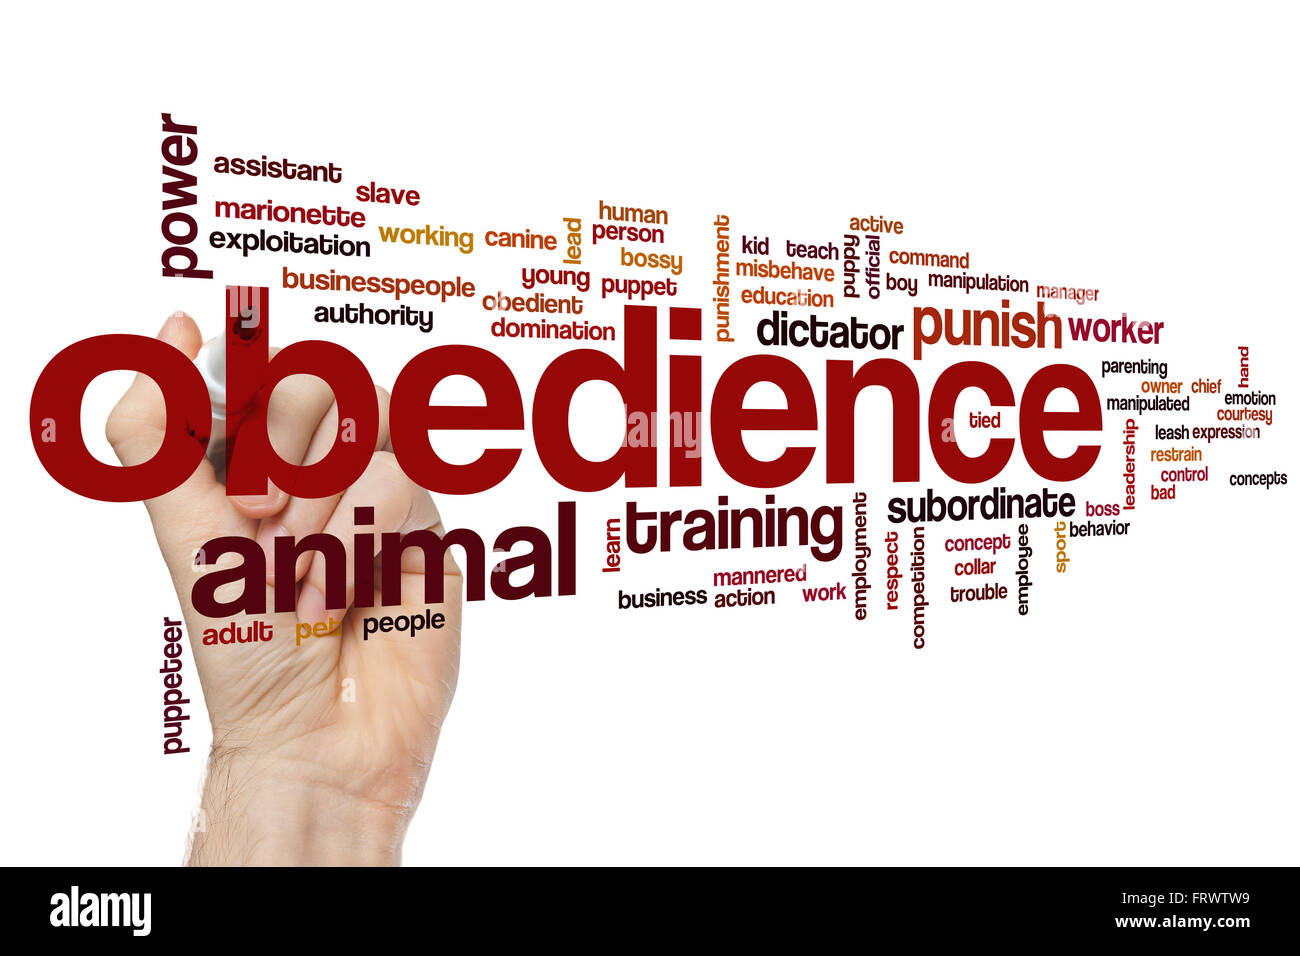 Obedience concept word cloud background Stock Photo